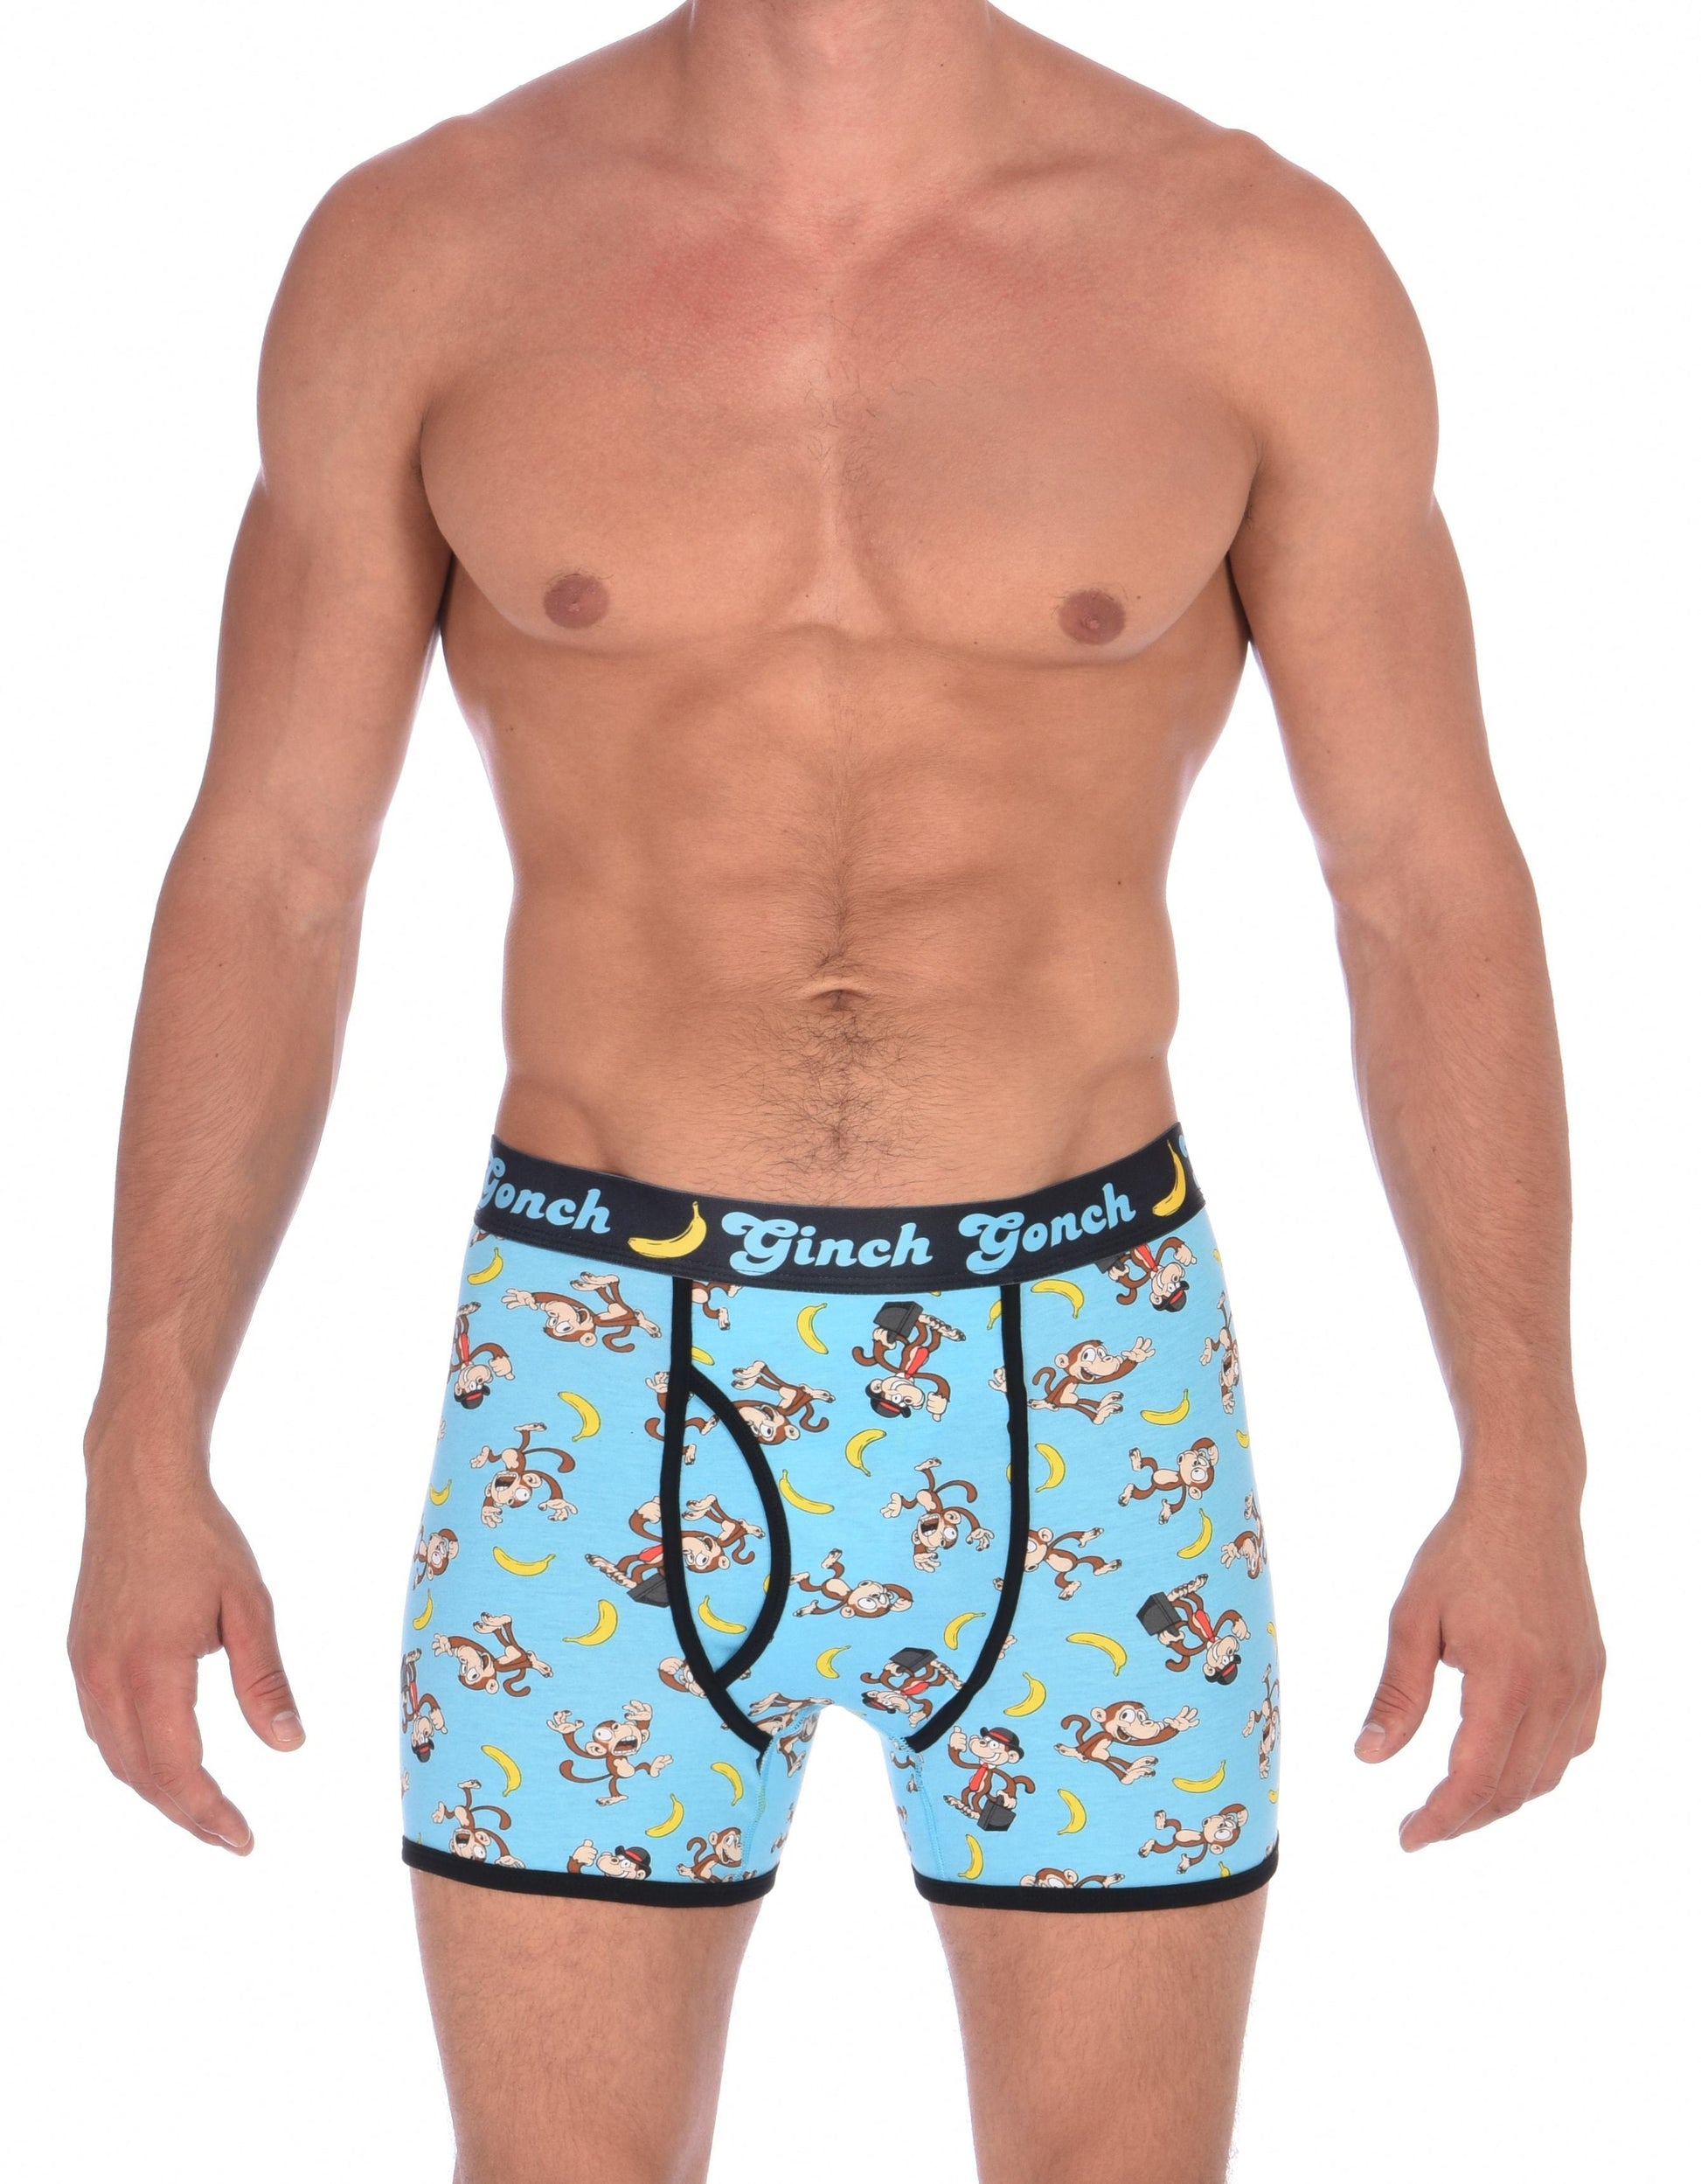 Ginch Gonch Monkey Business Boxer Brief Trunk with blue background, monkeys, and bananas. Black trim and printed waistband with Ginch Gonch and bananas. Front